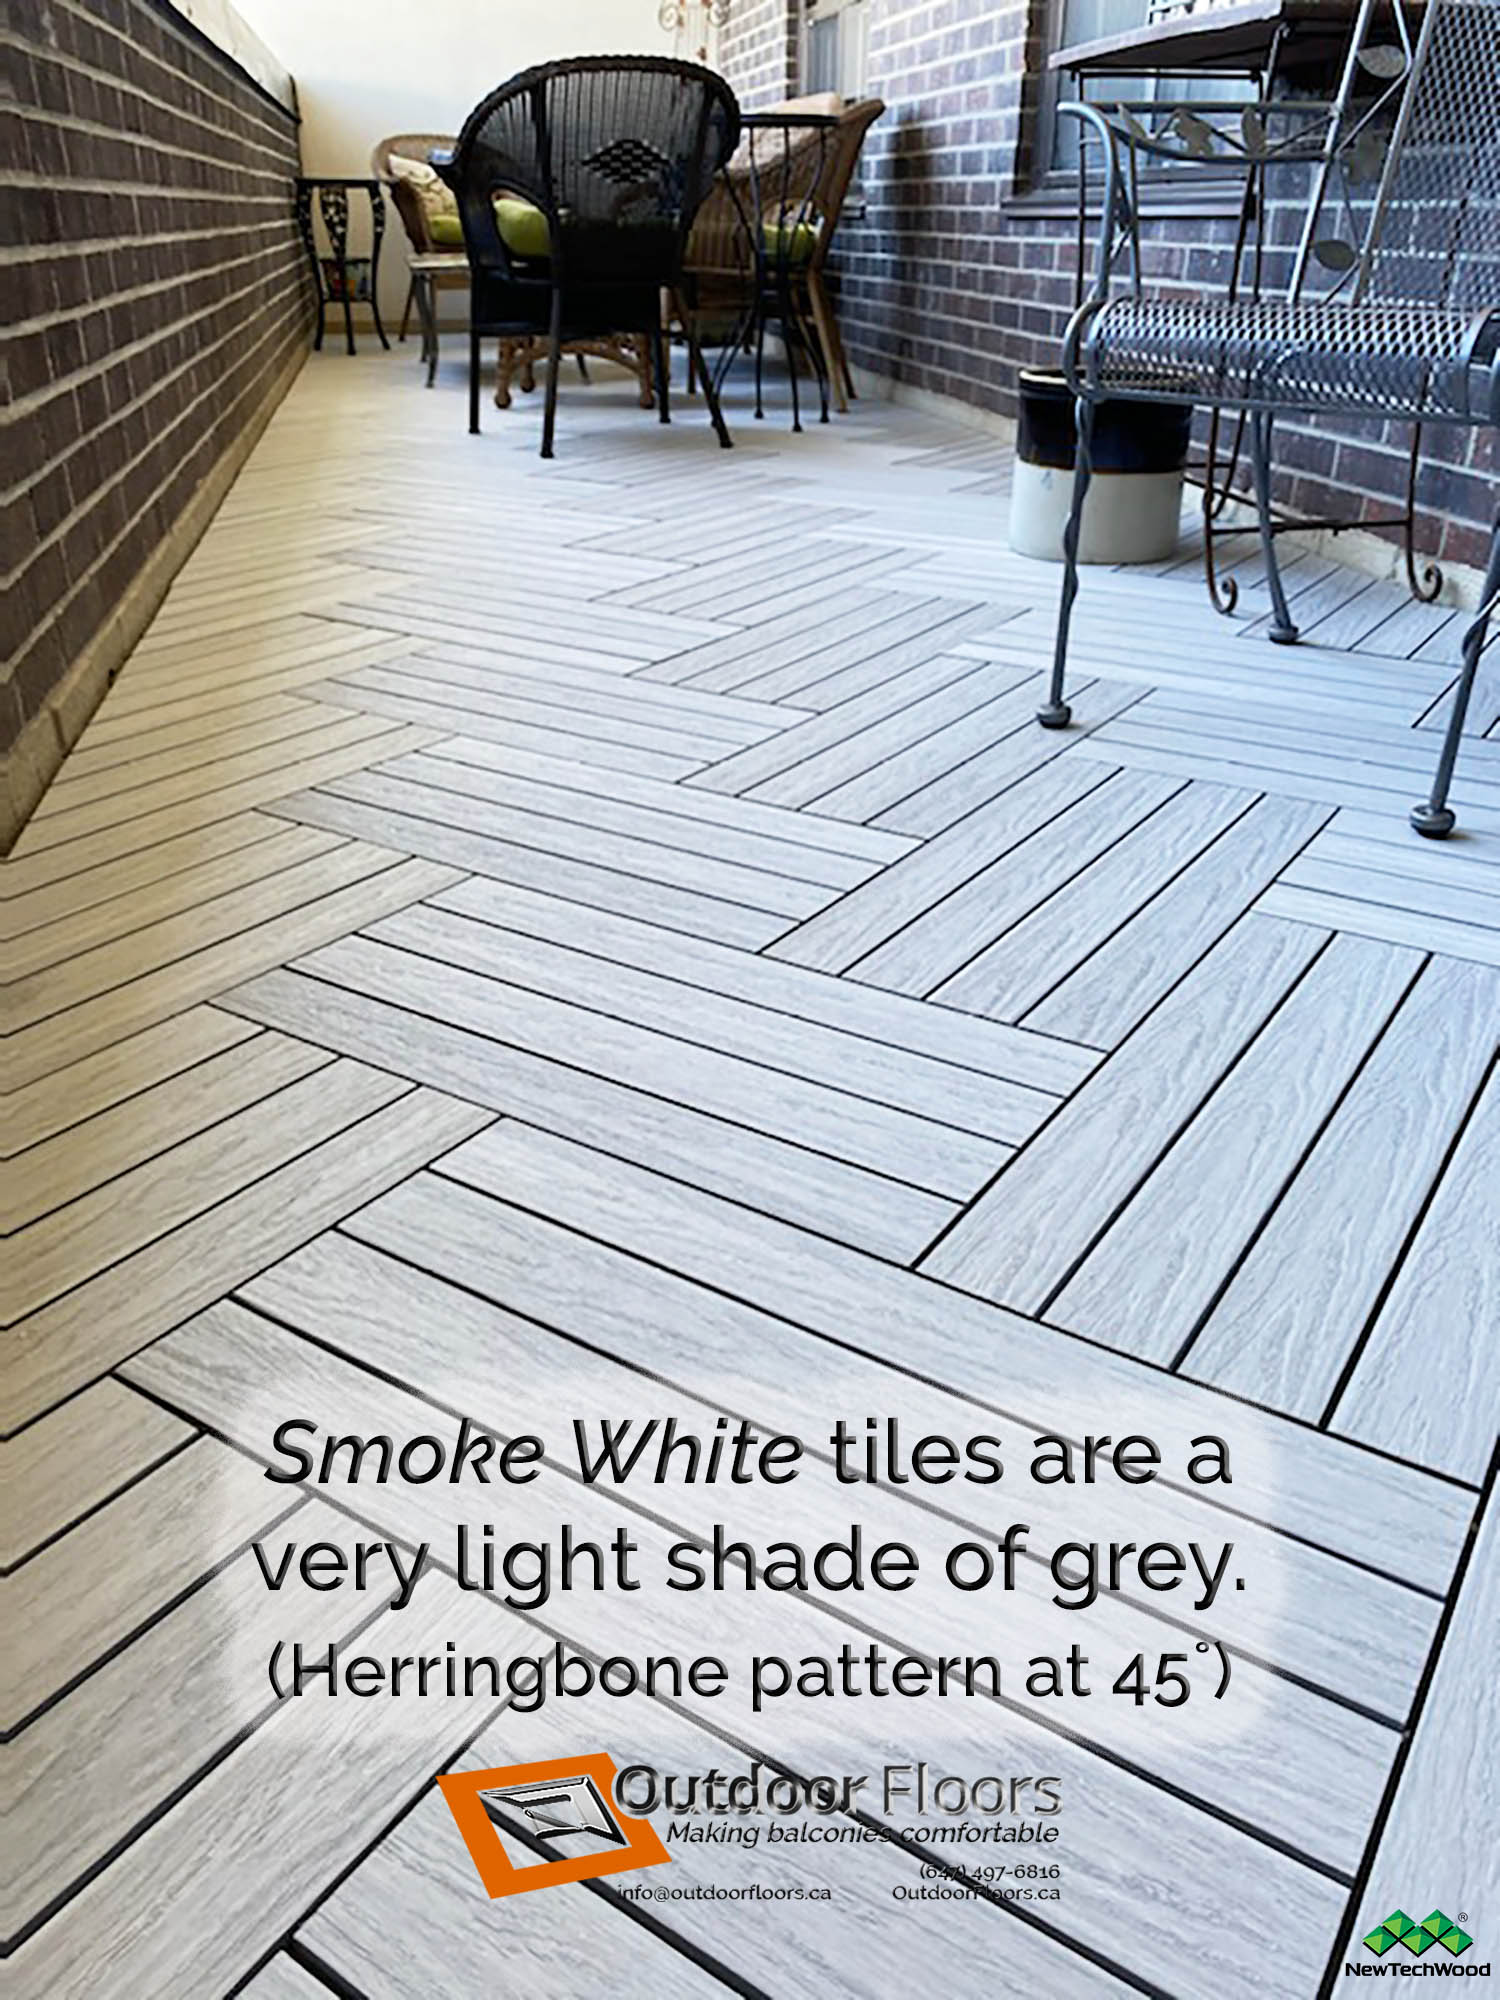 Smoke White tiles are a very light shade of grey.